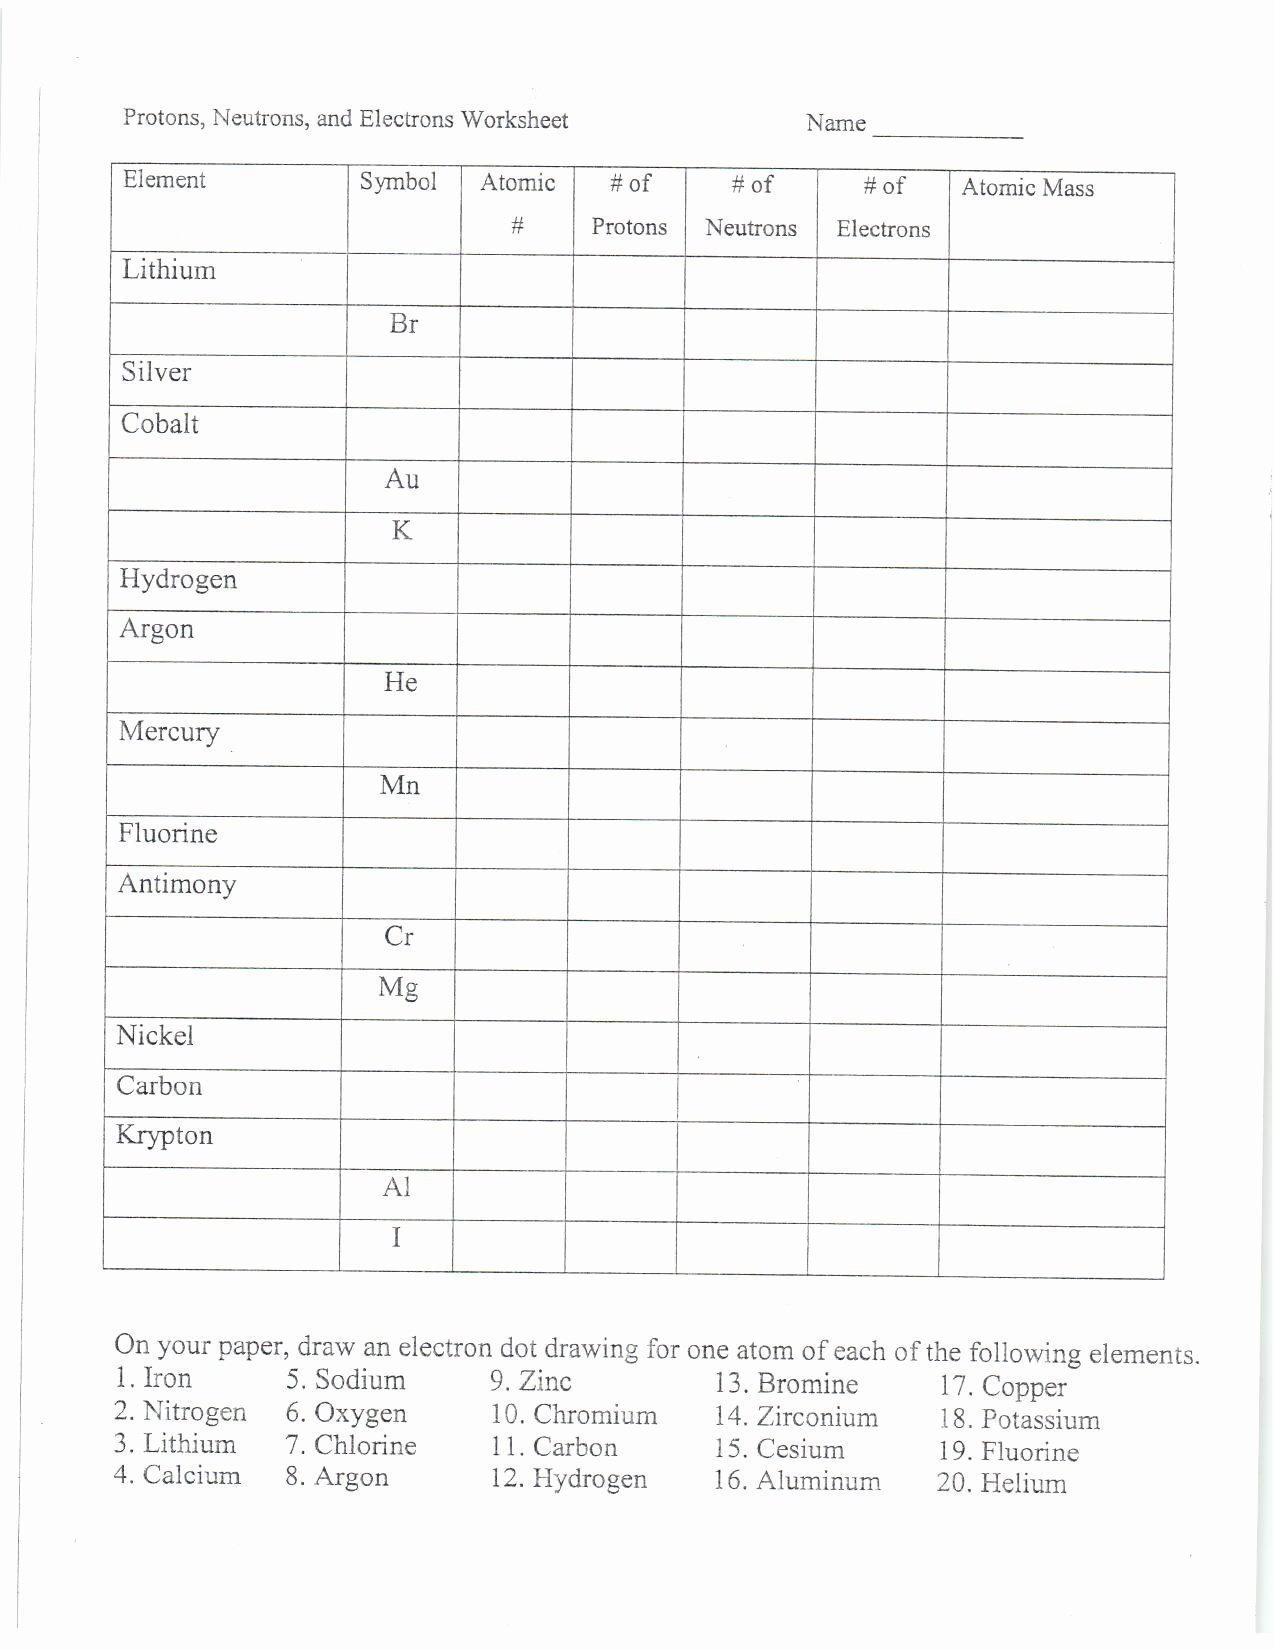 Protons Neutrons and Electrons Worksheet Luxury Unit 8 ﻿﻿﻿8th Grade Physical Science